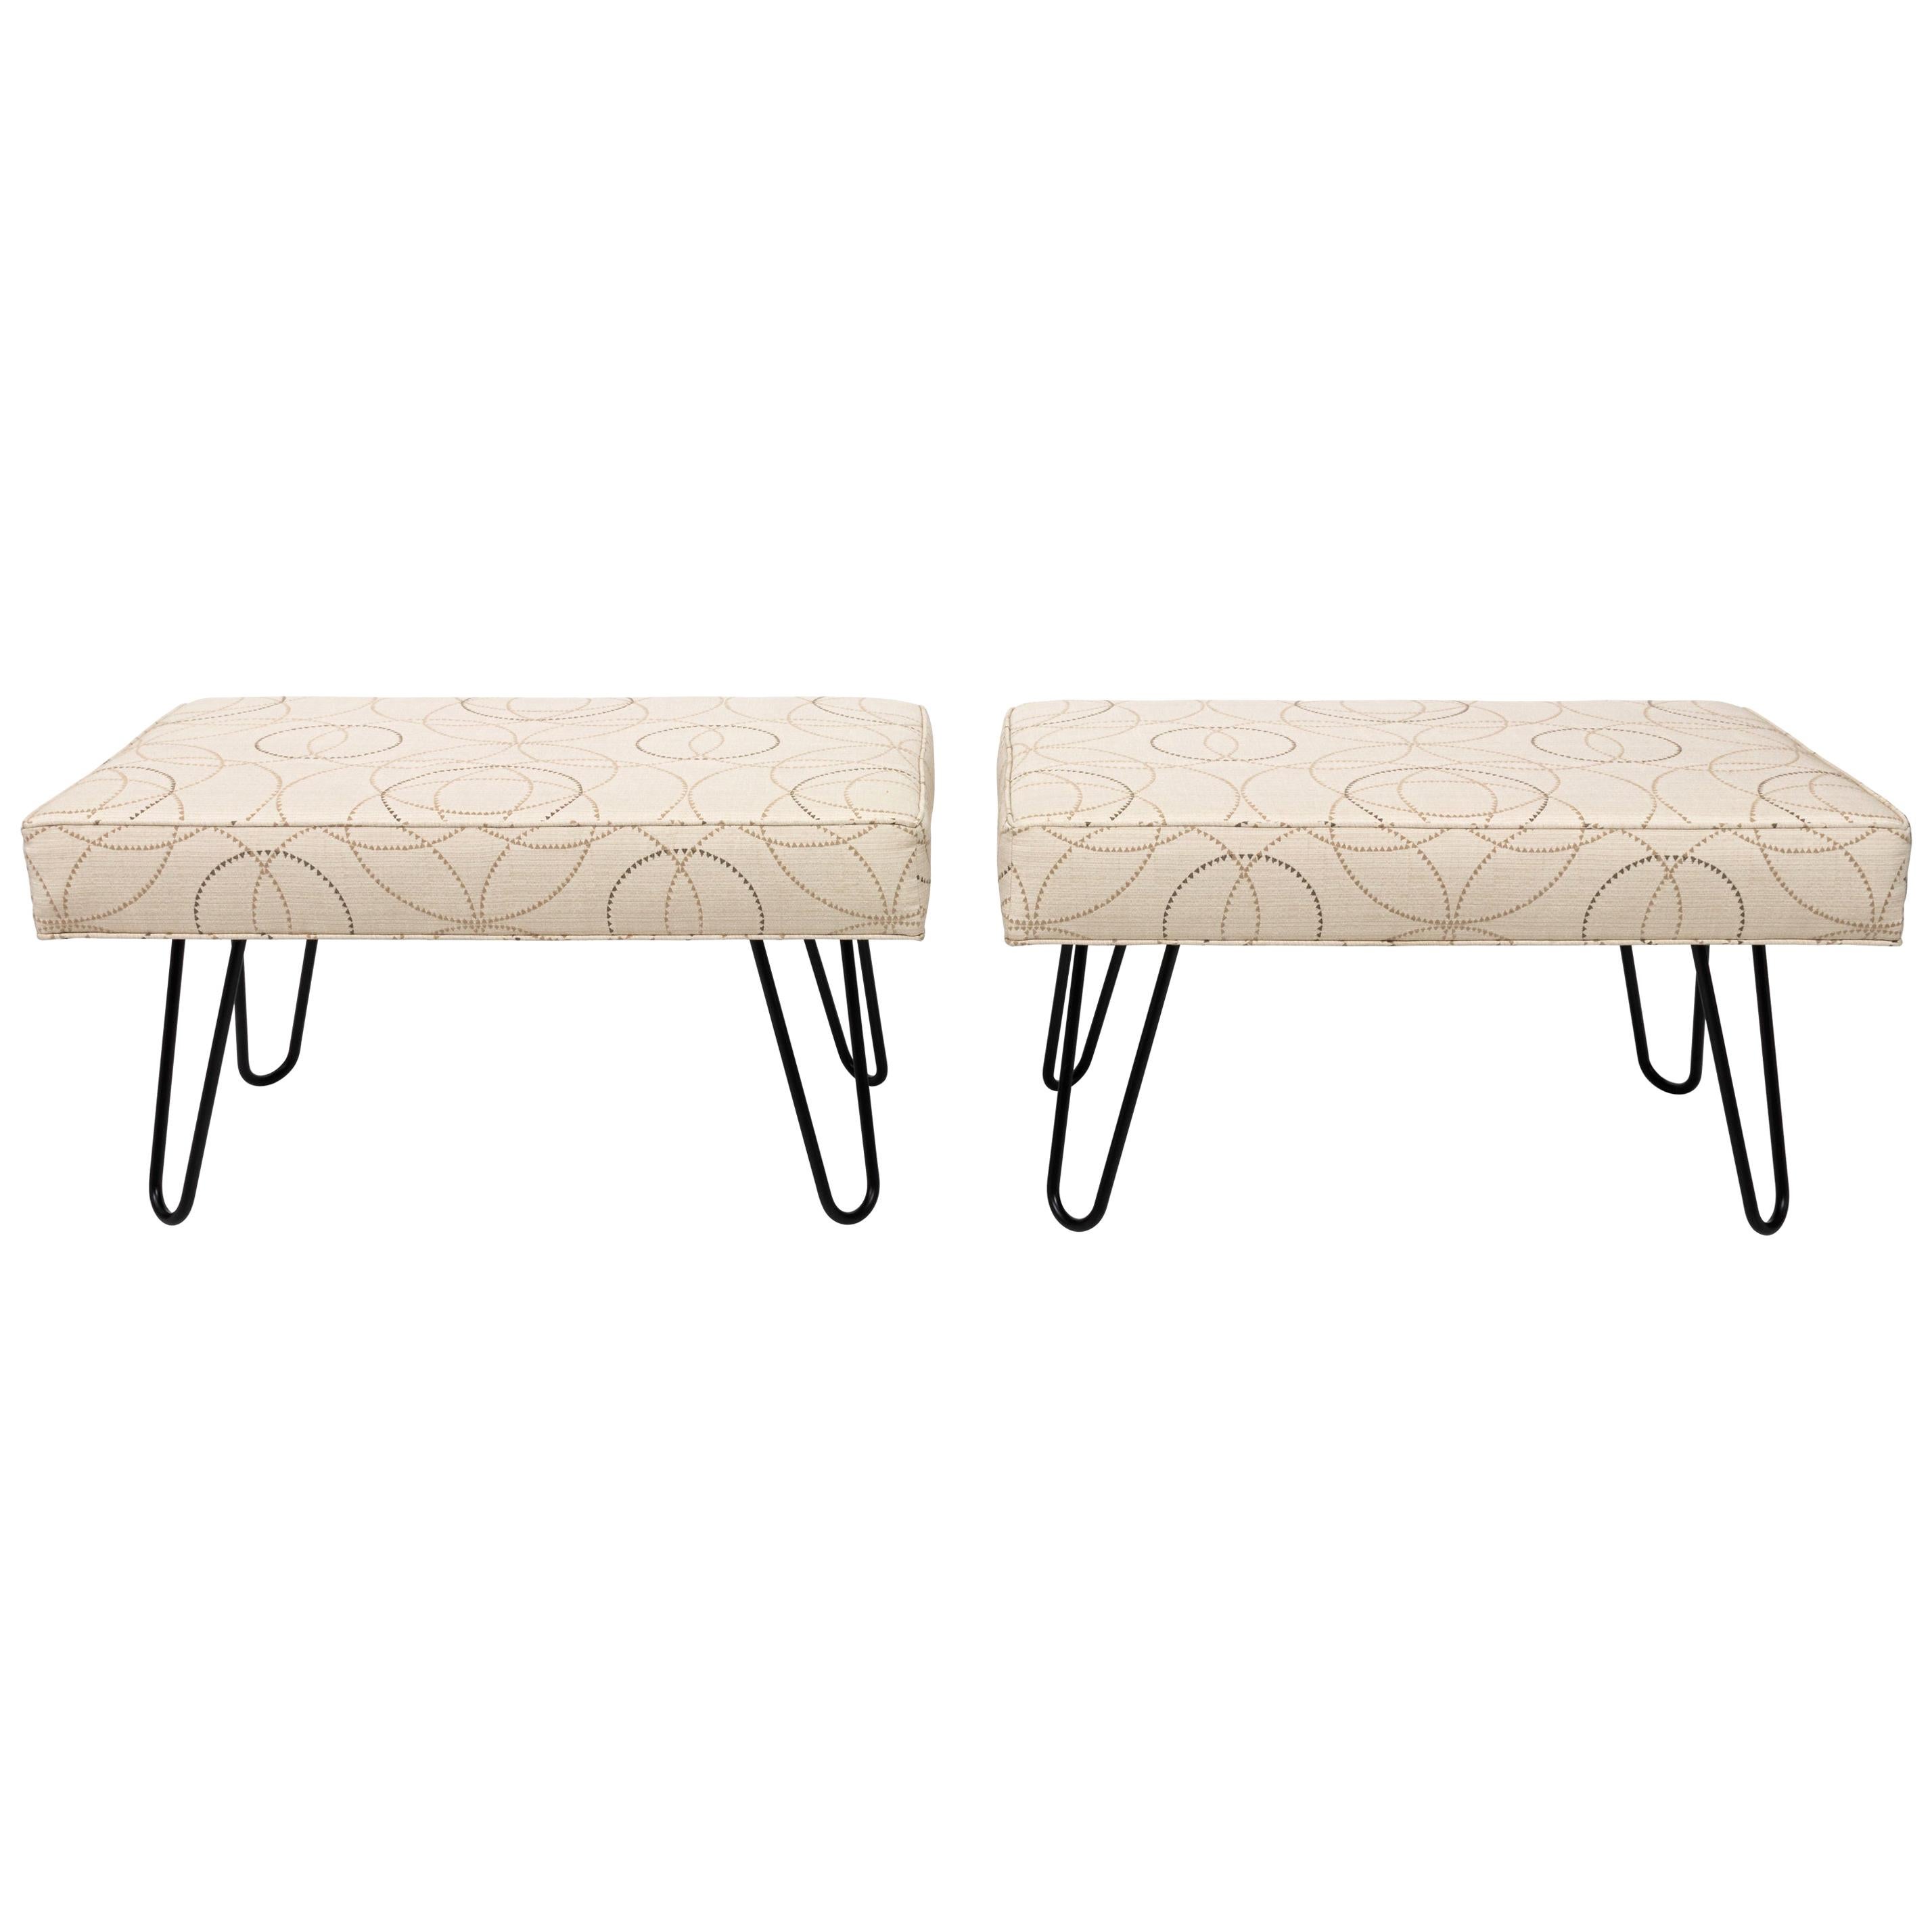 Pair of Custom Mid Century Style Hairpin Leg Benches For Sale 3